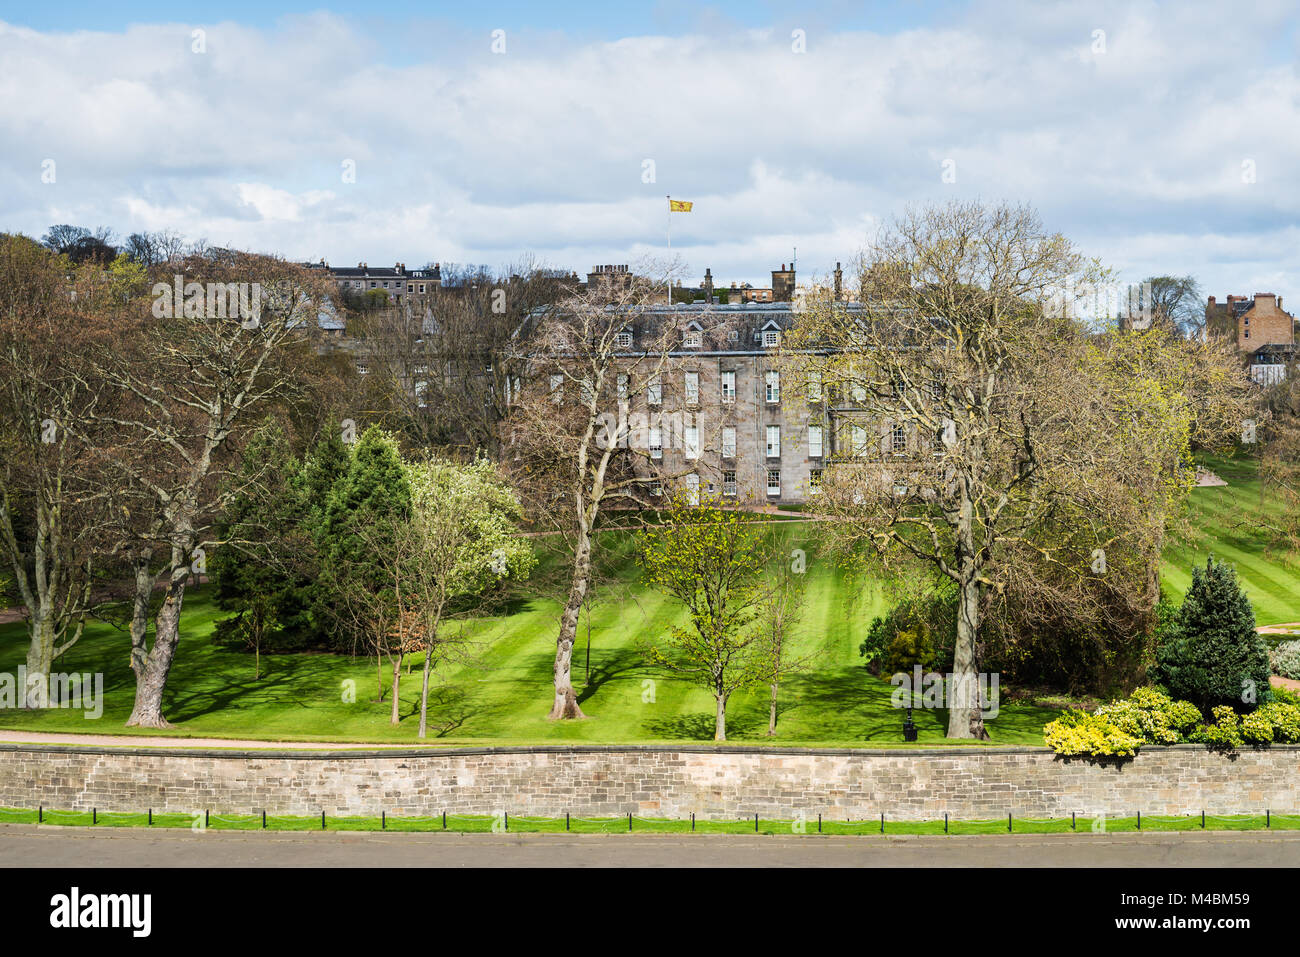 Hollyrood palace viewed from Hill in Edinburgh, Scotland, UK Stock Photo